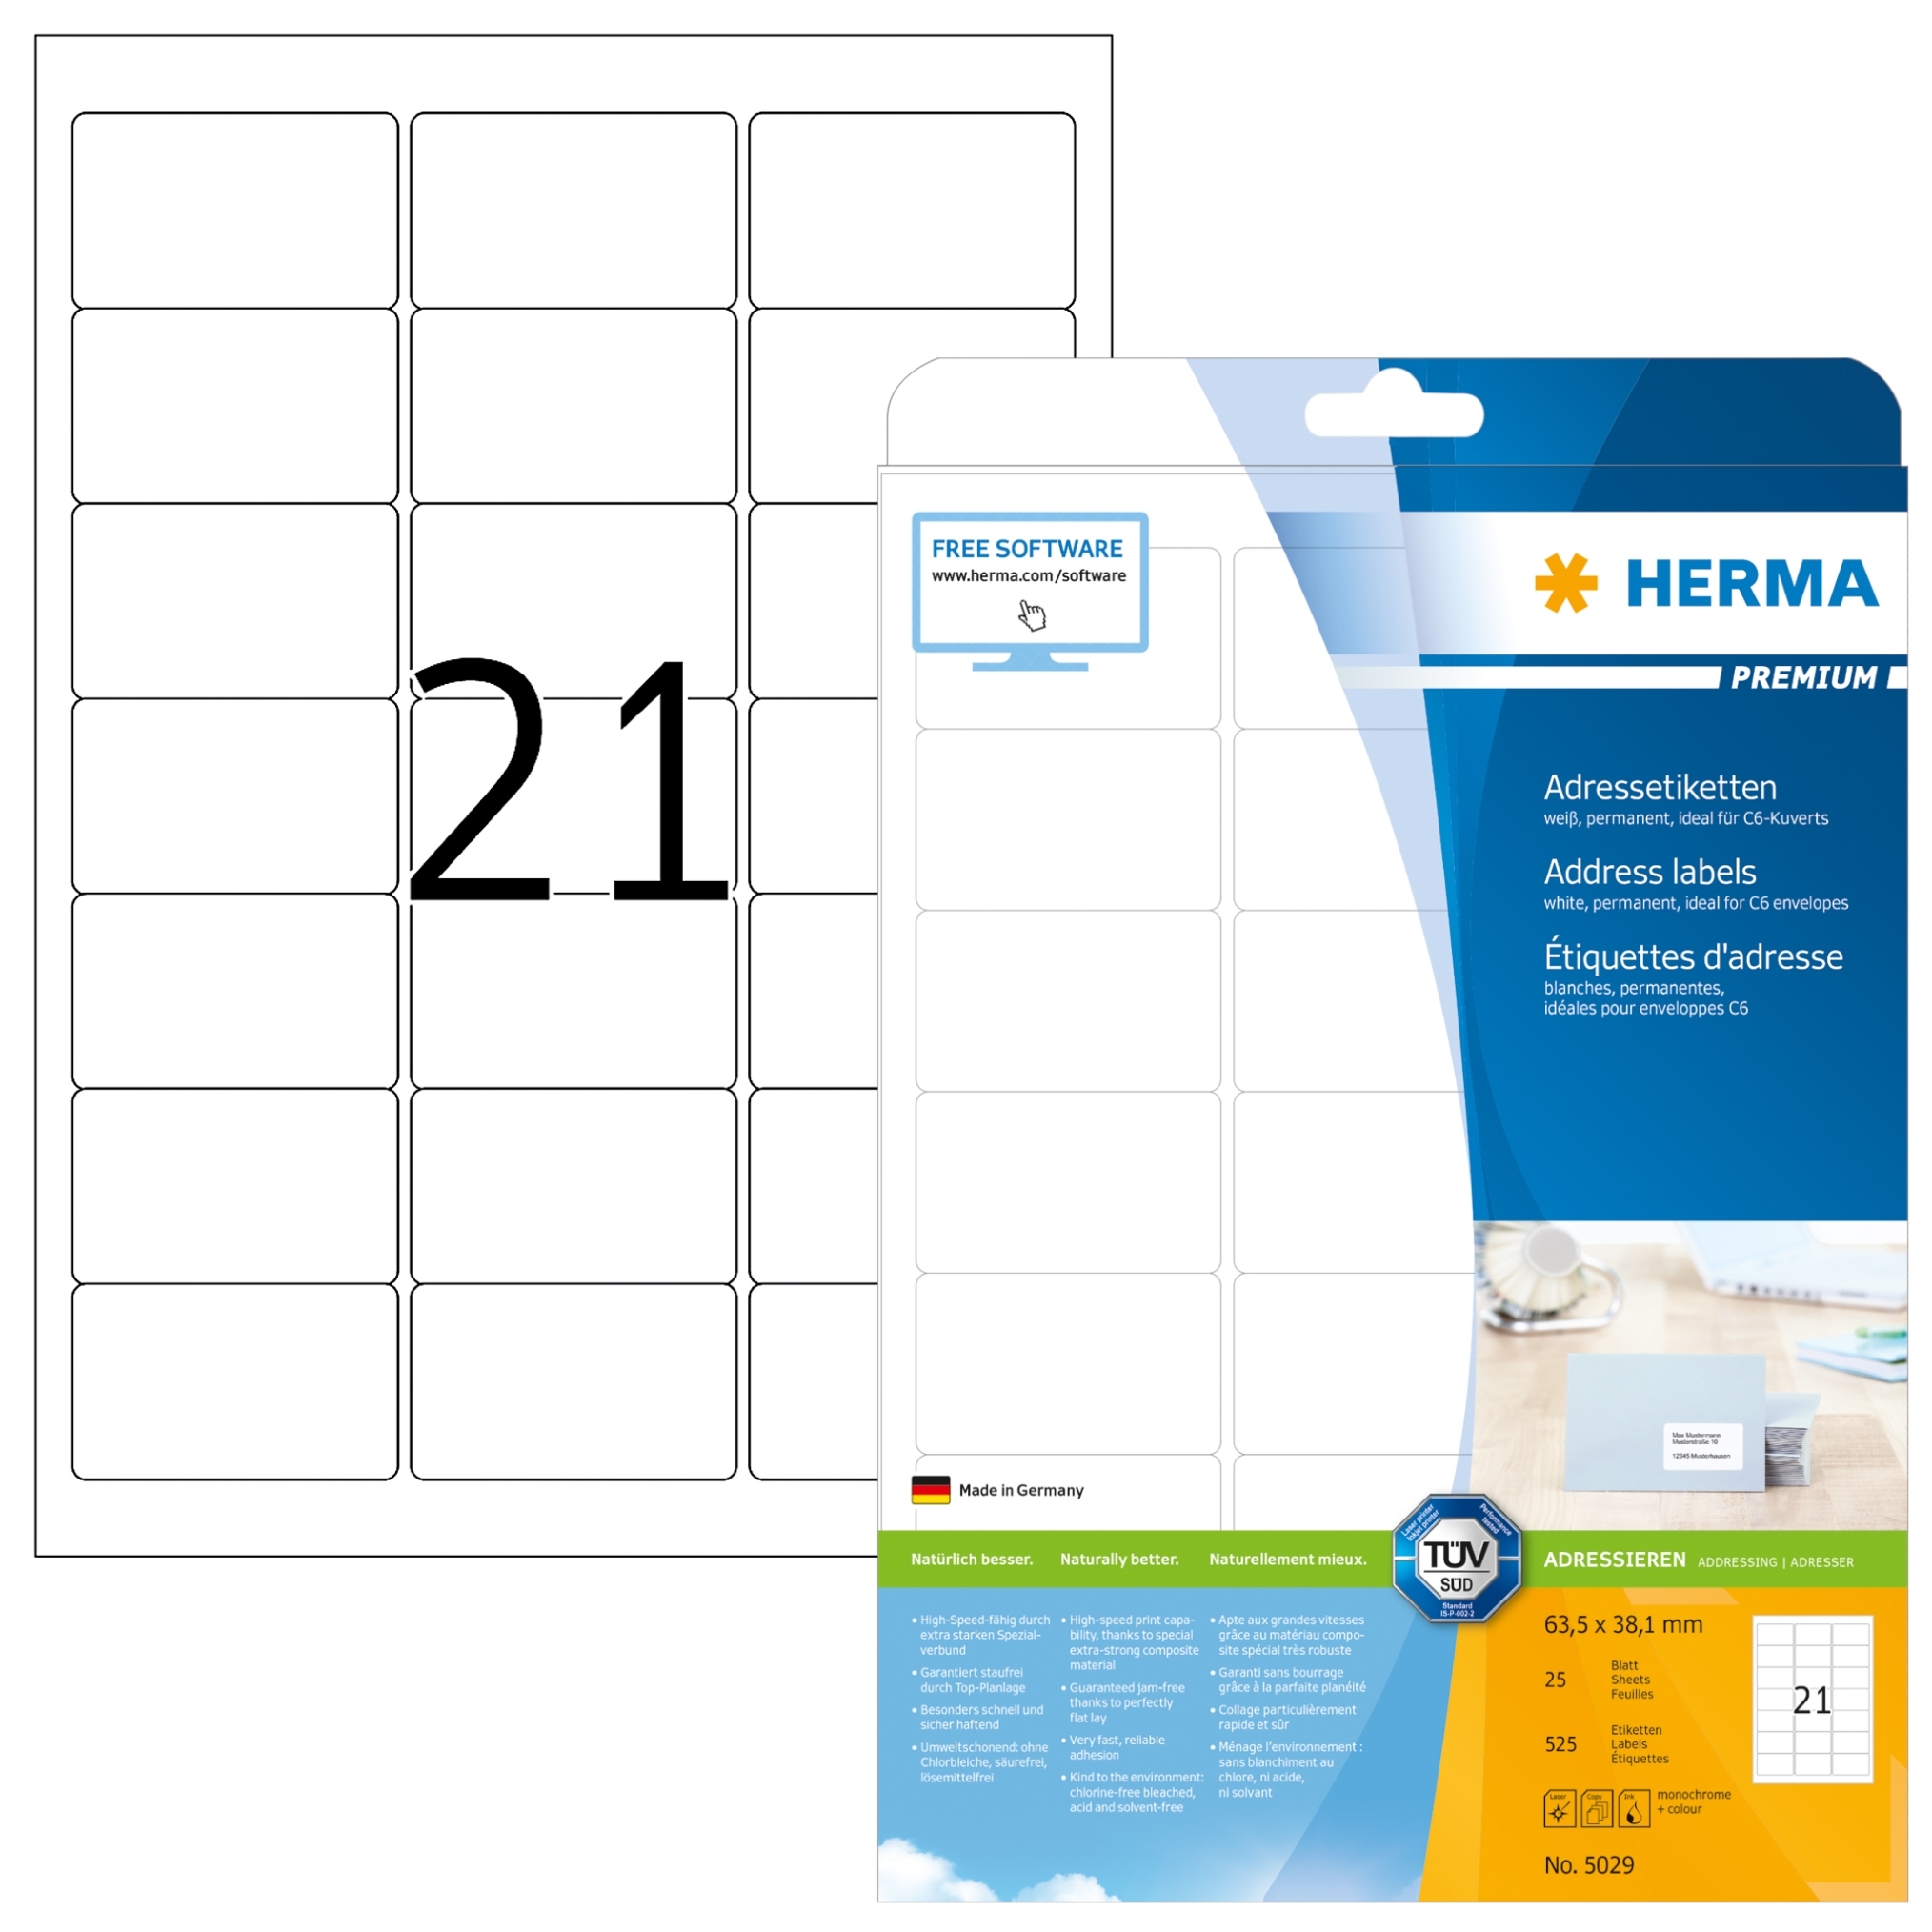 Print On To 21 Labels Per Sheet - All Label Template Sizes Free Label Pertaining To Label Printing Template 21 Per Sheet